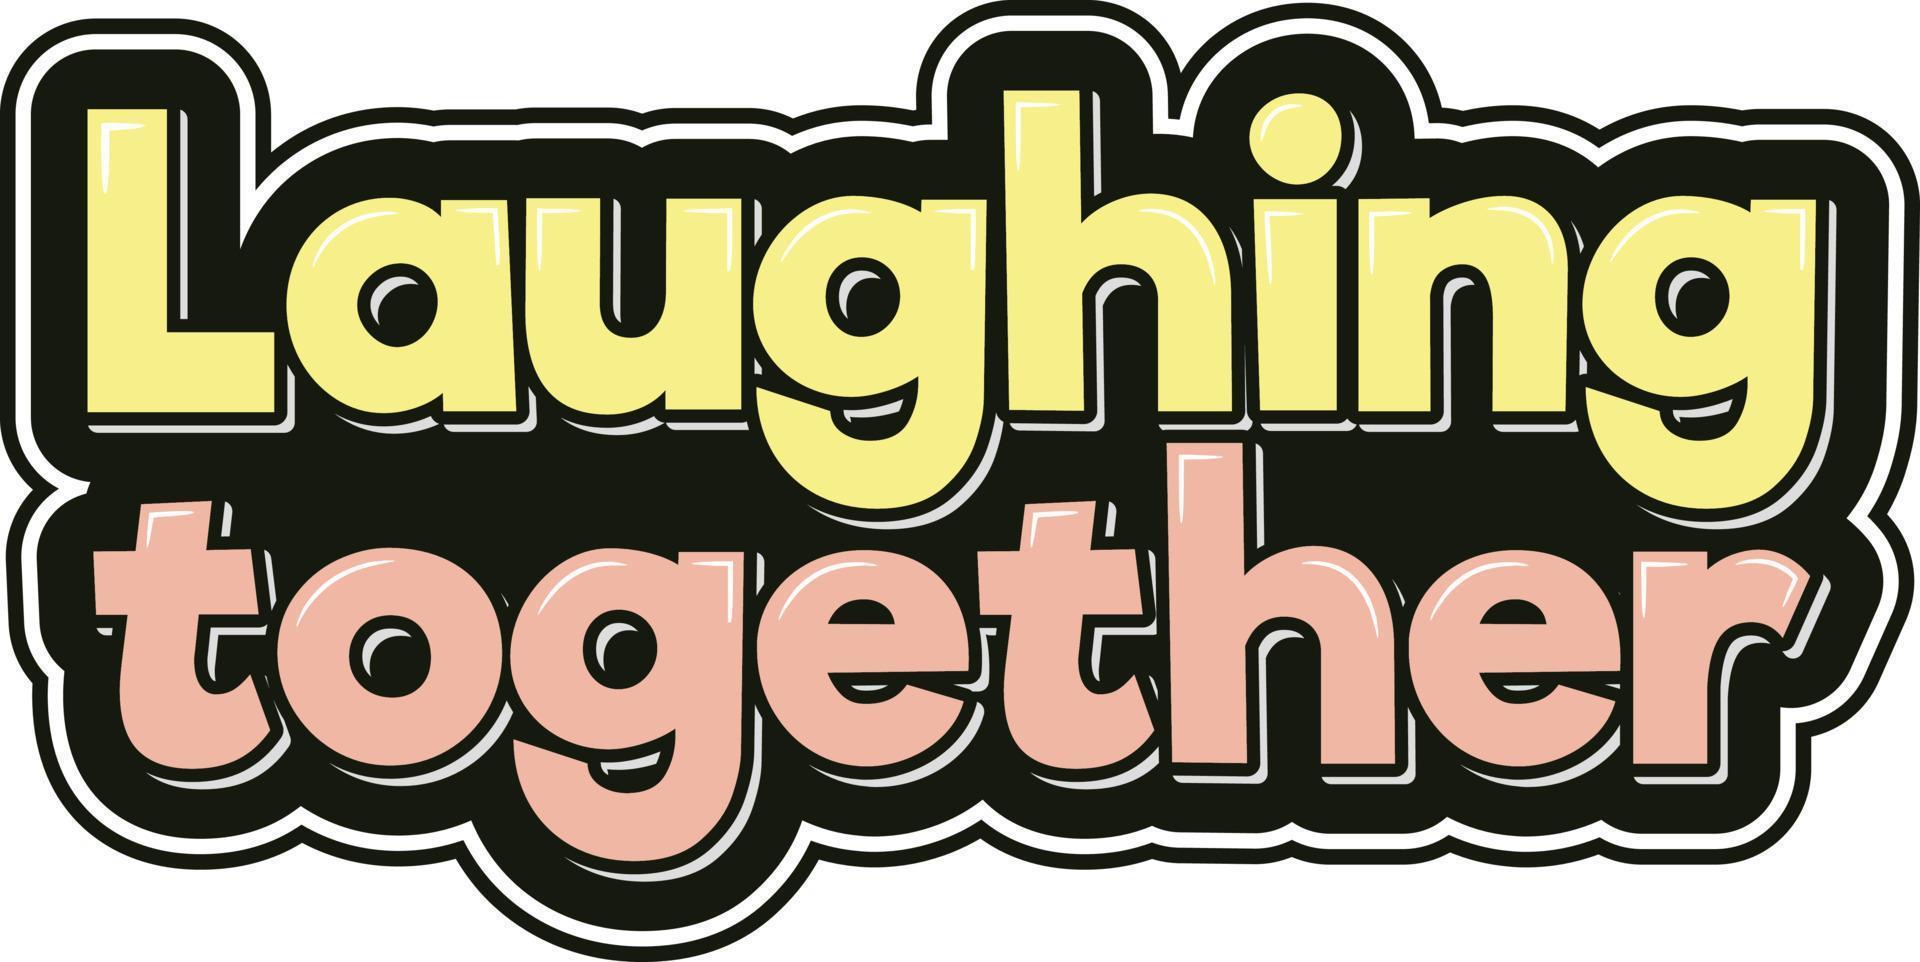 Vector Lettering of Laughing Together